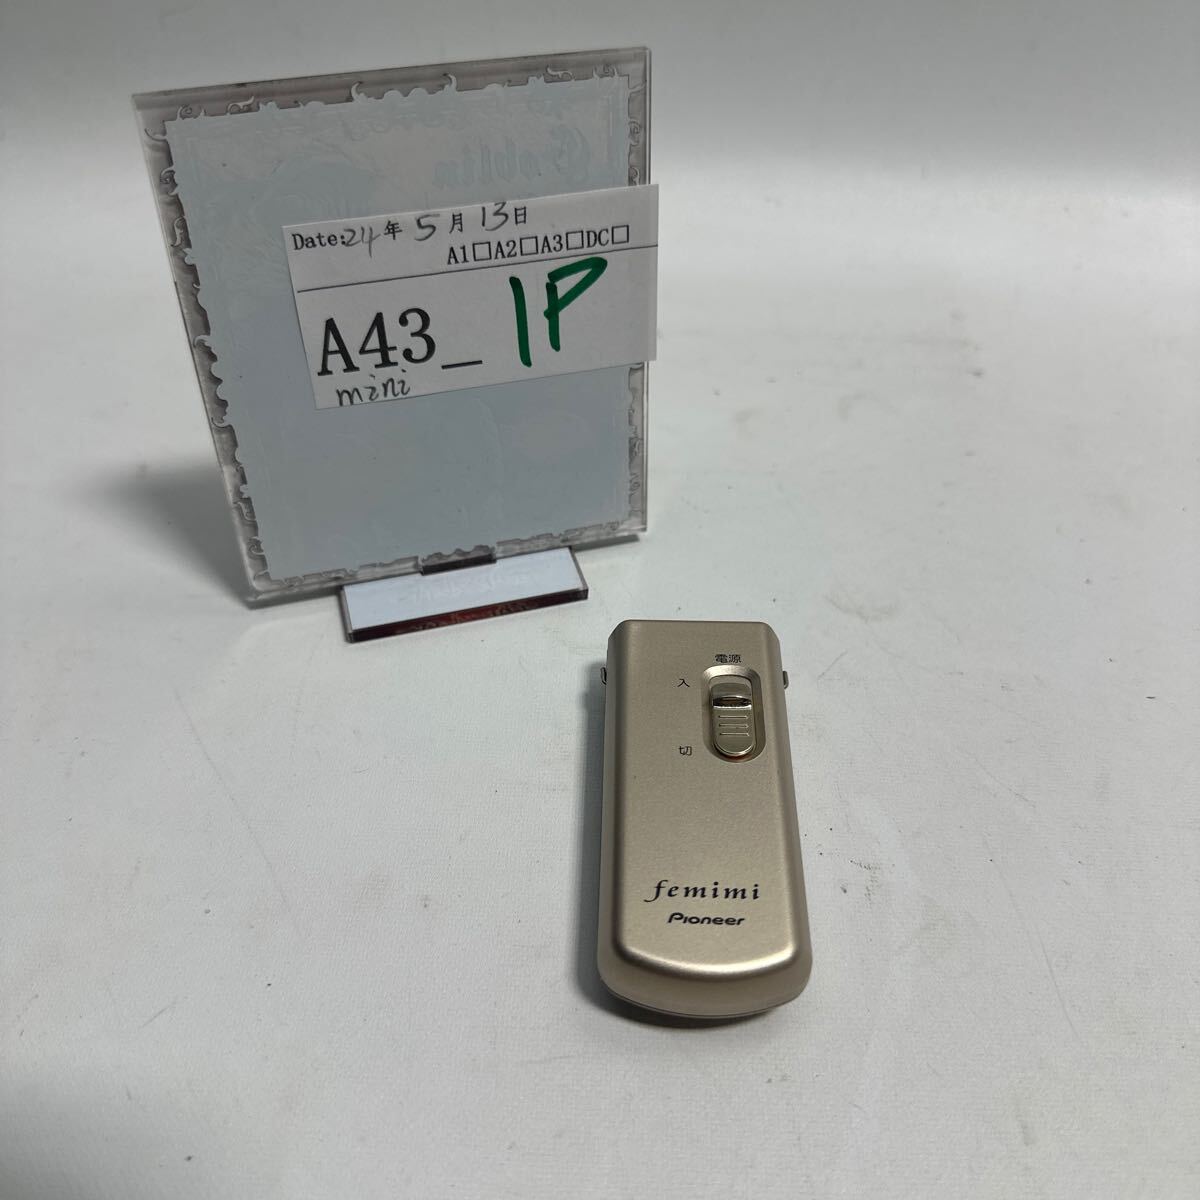 [A43_1P]Pioneer Femimi Pioneer voice monitor ring VMR-M77 hearing aid compilation sound machine operation goods body only earphone part less (240513)